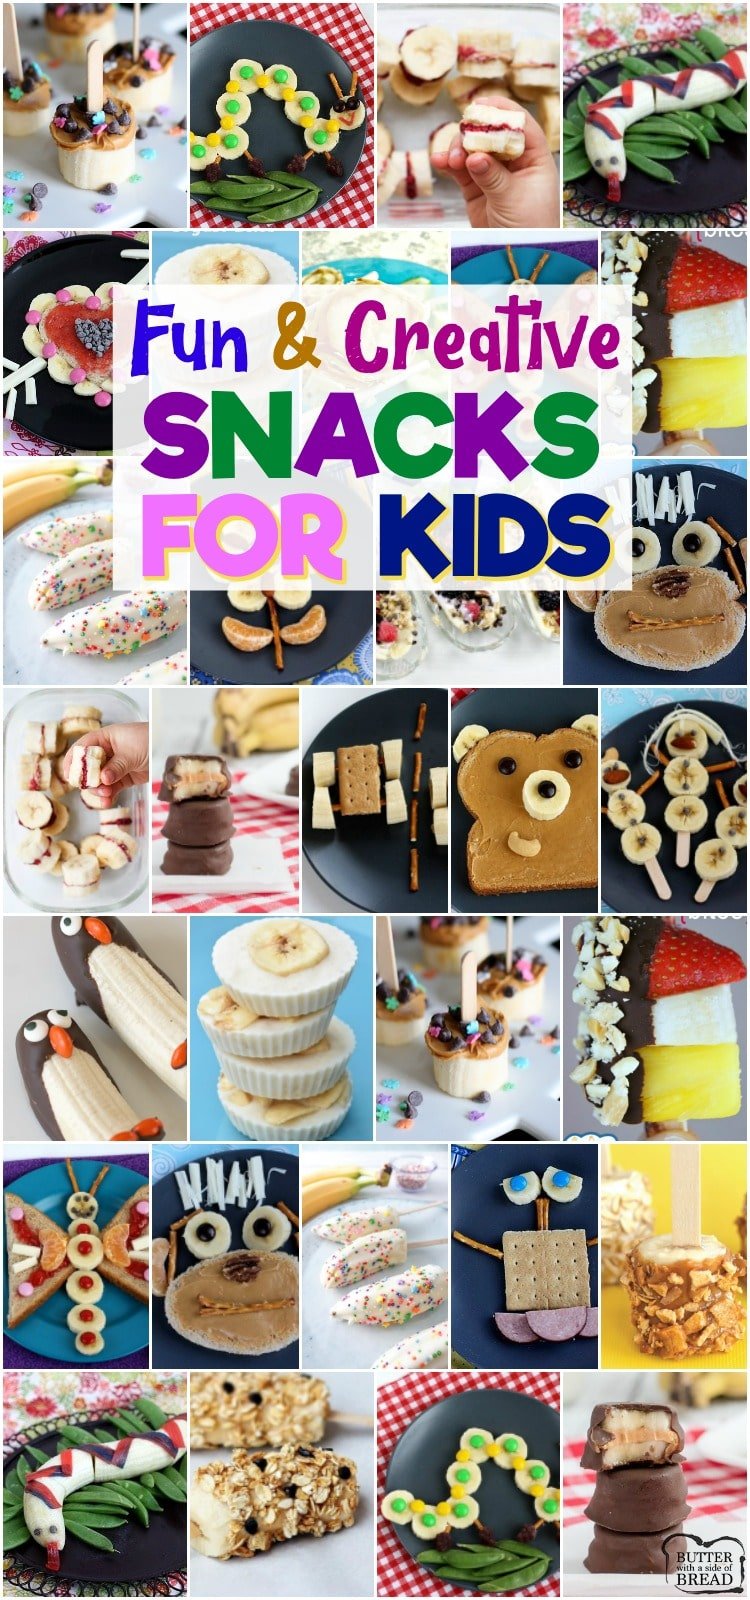 Snacks with Bananas are fun & healthy snacks perfect for even the pickiest of kids! These banana snacks are perfect for breakfast, lunch, snacks and treats! #bananas #snack #kidsnacks #snacks #fruit #lunch from BUTTER WITH A SIDE OF BREAD